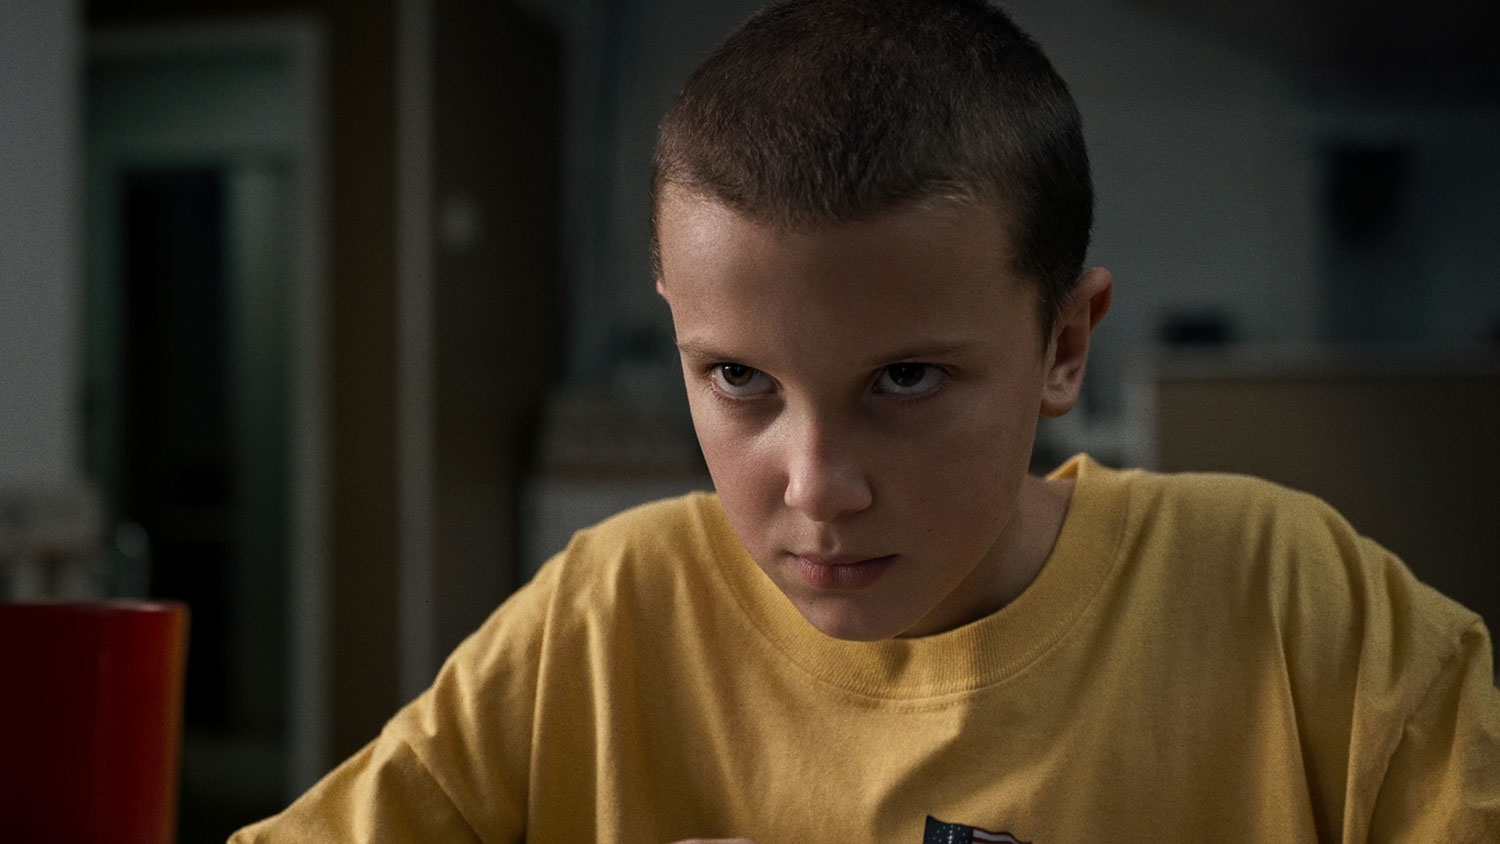 That's how a person changes in six months in the Stranger Things universe!  : r/StrangerThings